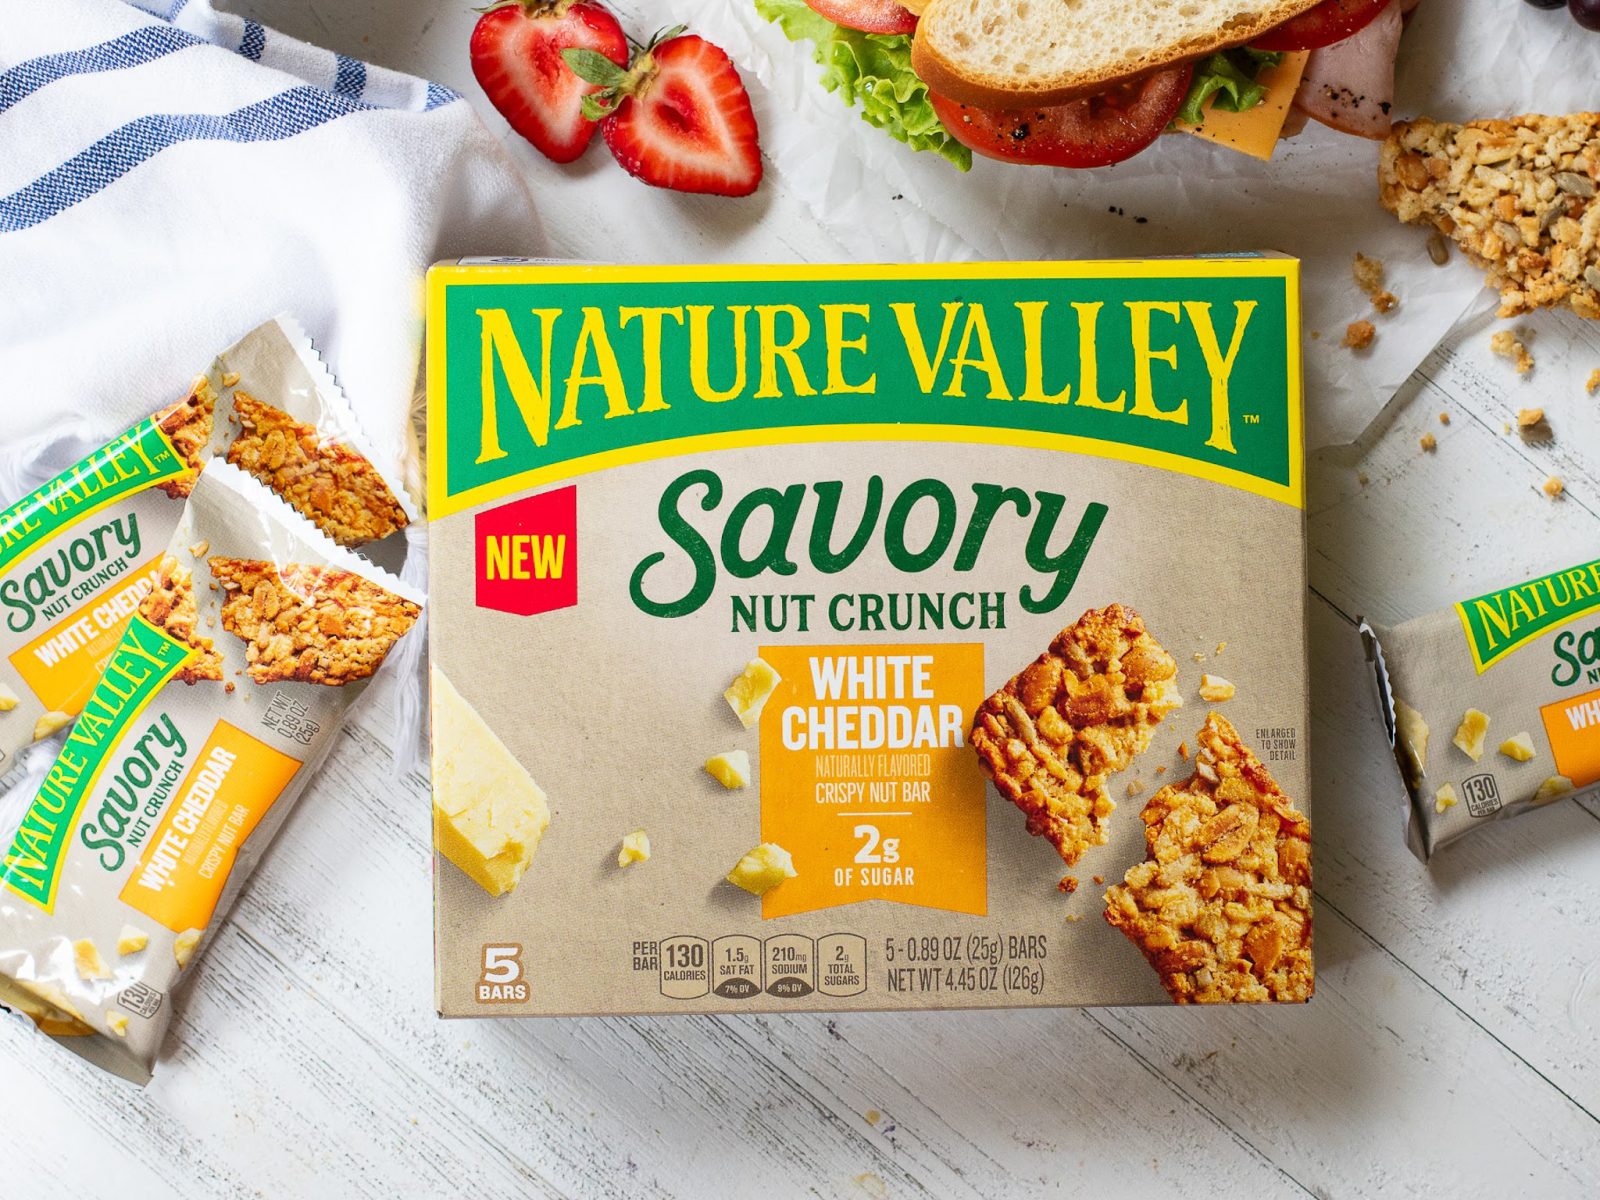 Get Nature Valley Savory Bars For As Low As $1.24 At Kroger